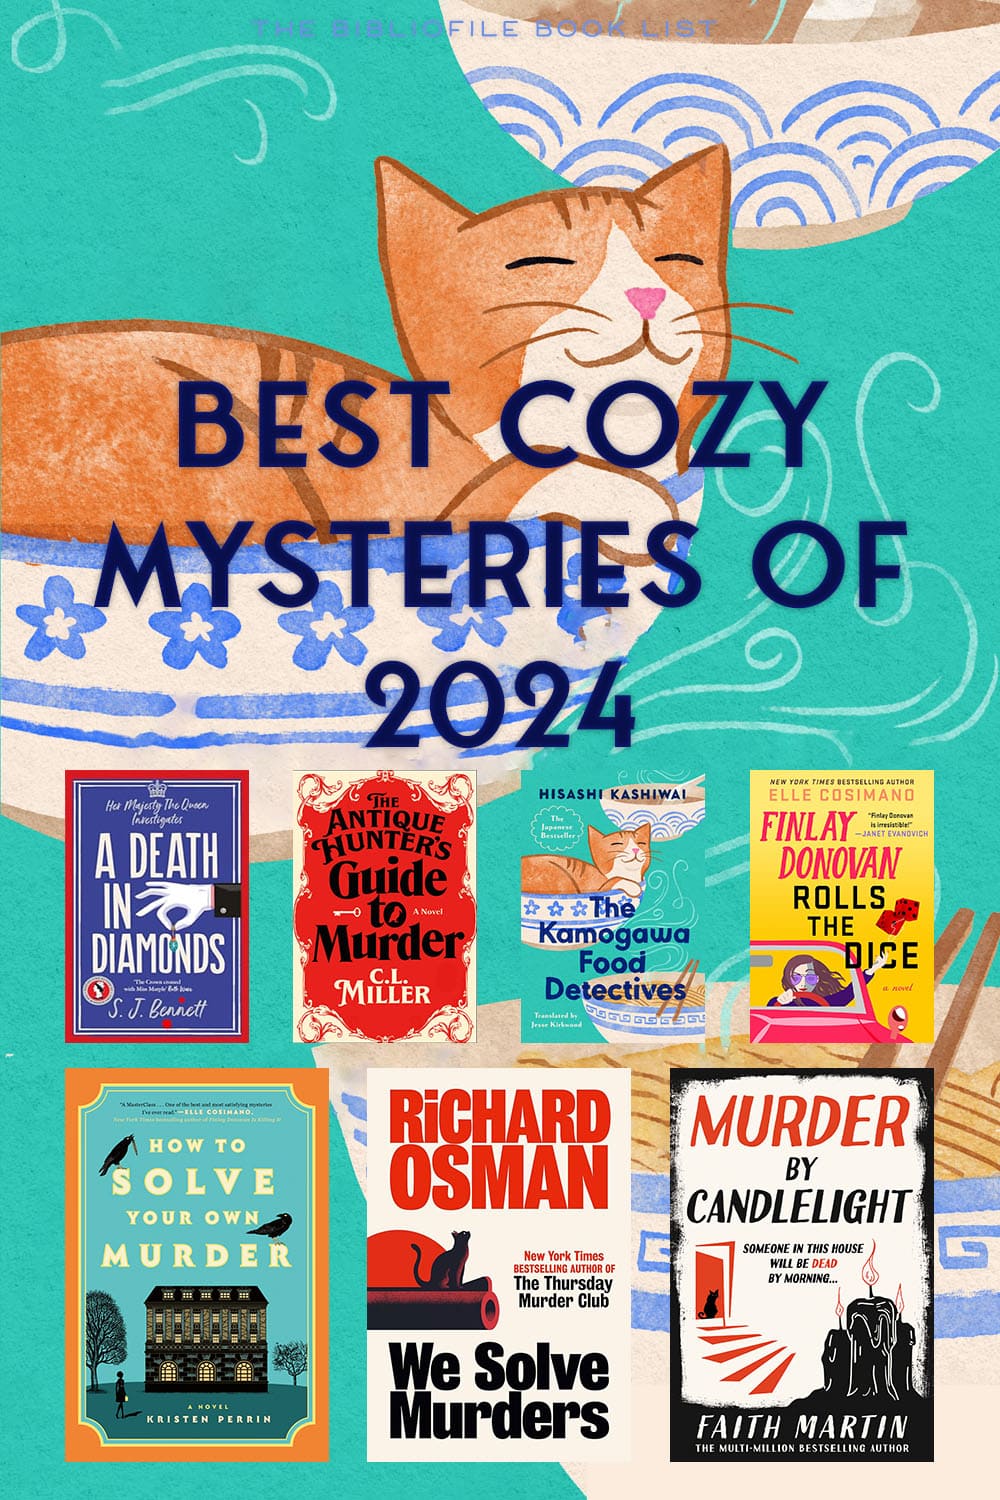 Best Cozy Mystery Books of 2024 The Bibliofile